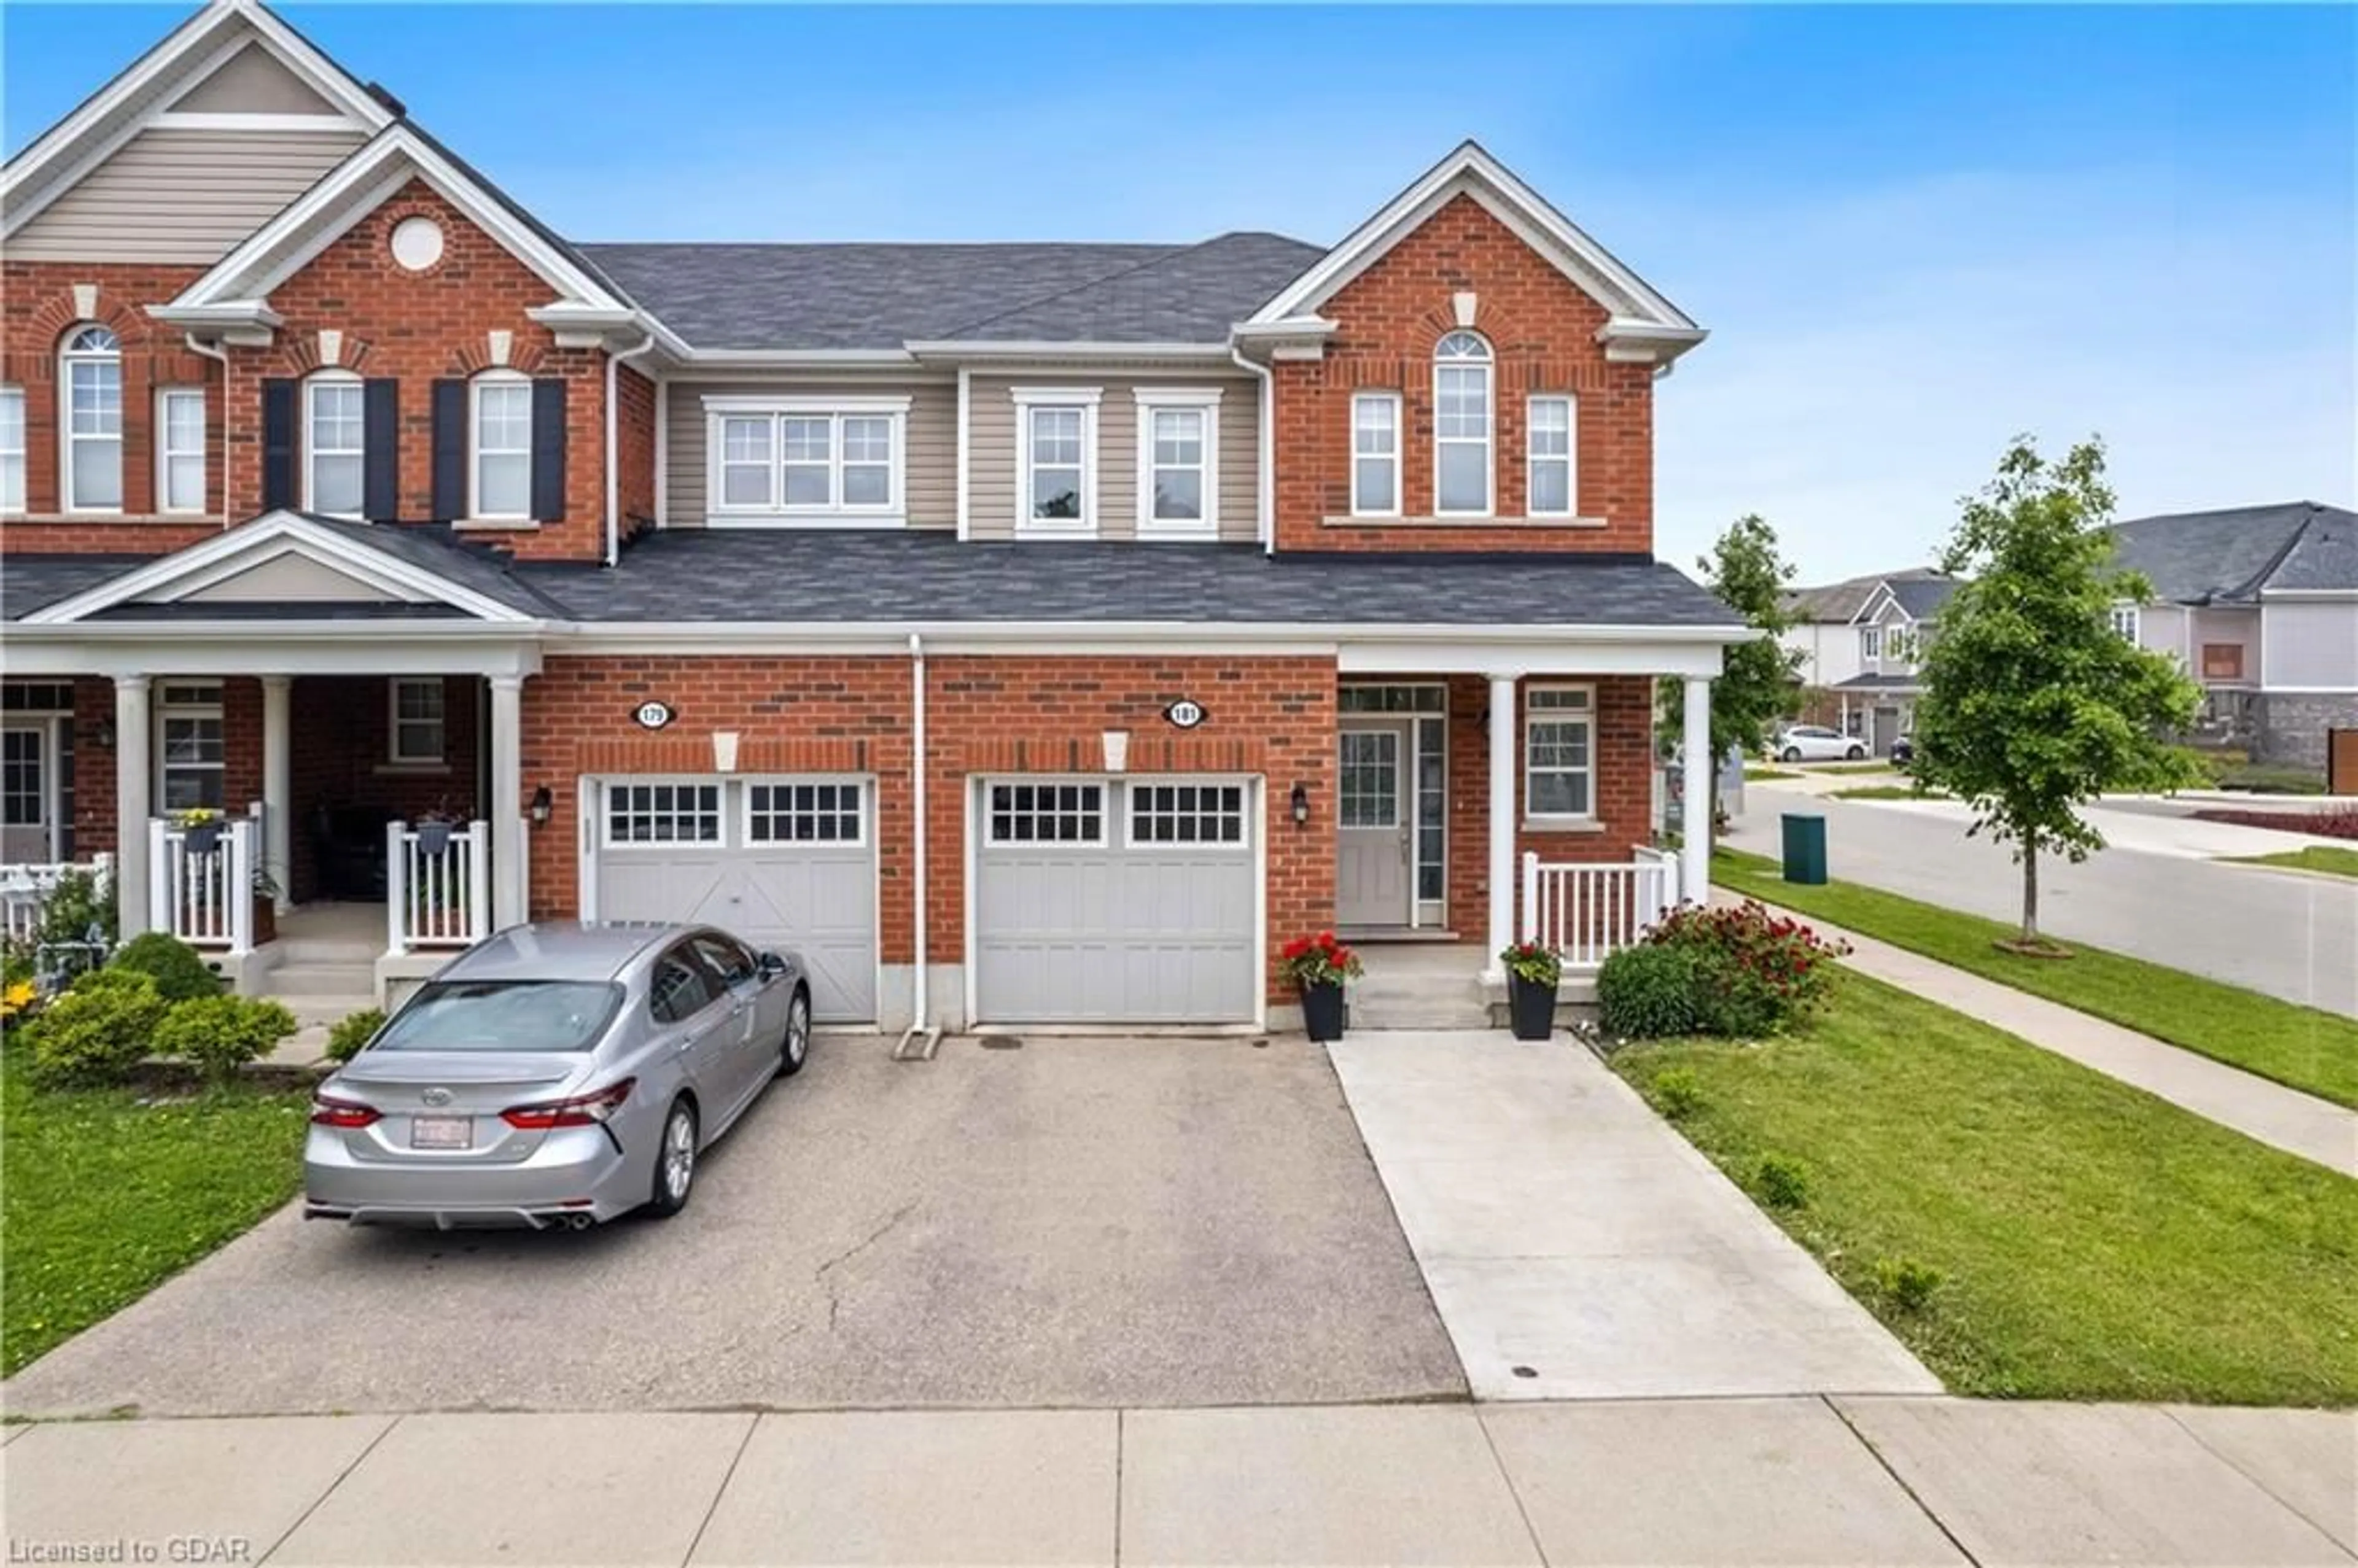 Home with brick exterior material for 181 West Oak Trail, Kitchener Ontario N2R 0J2